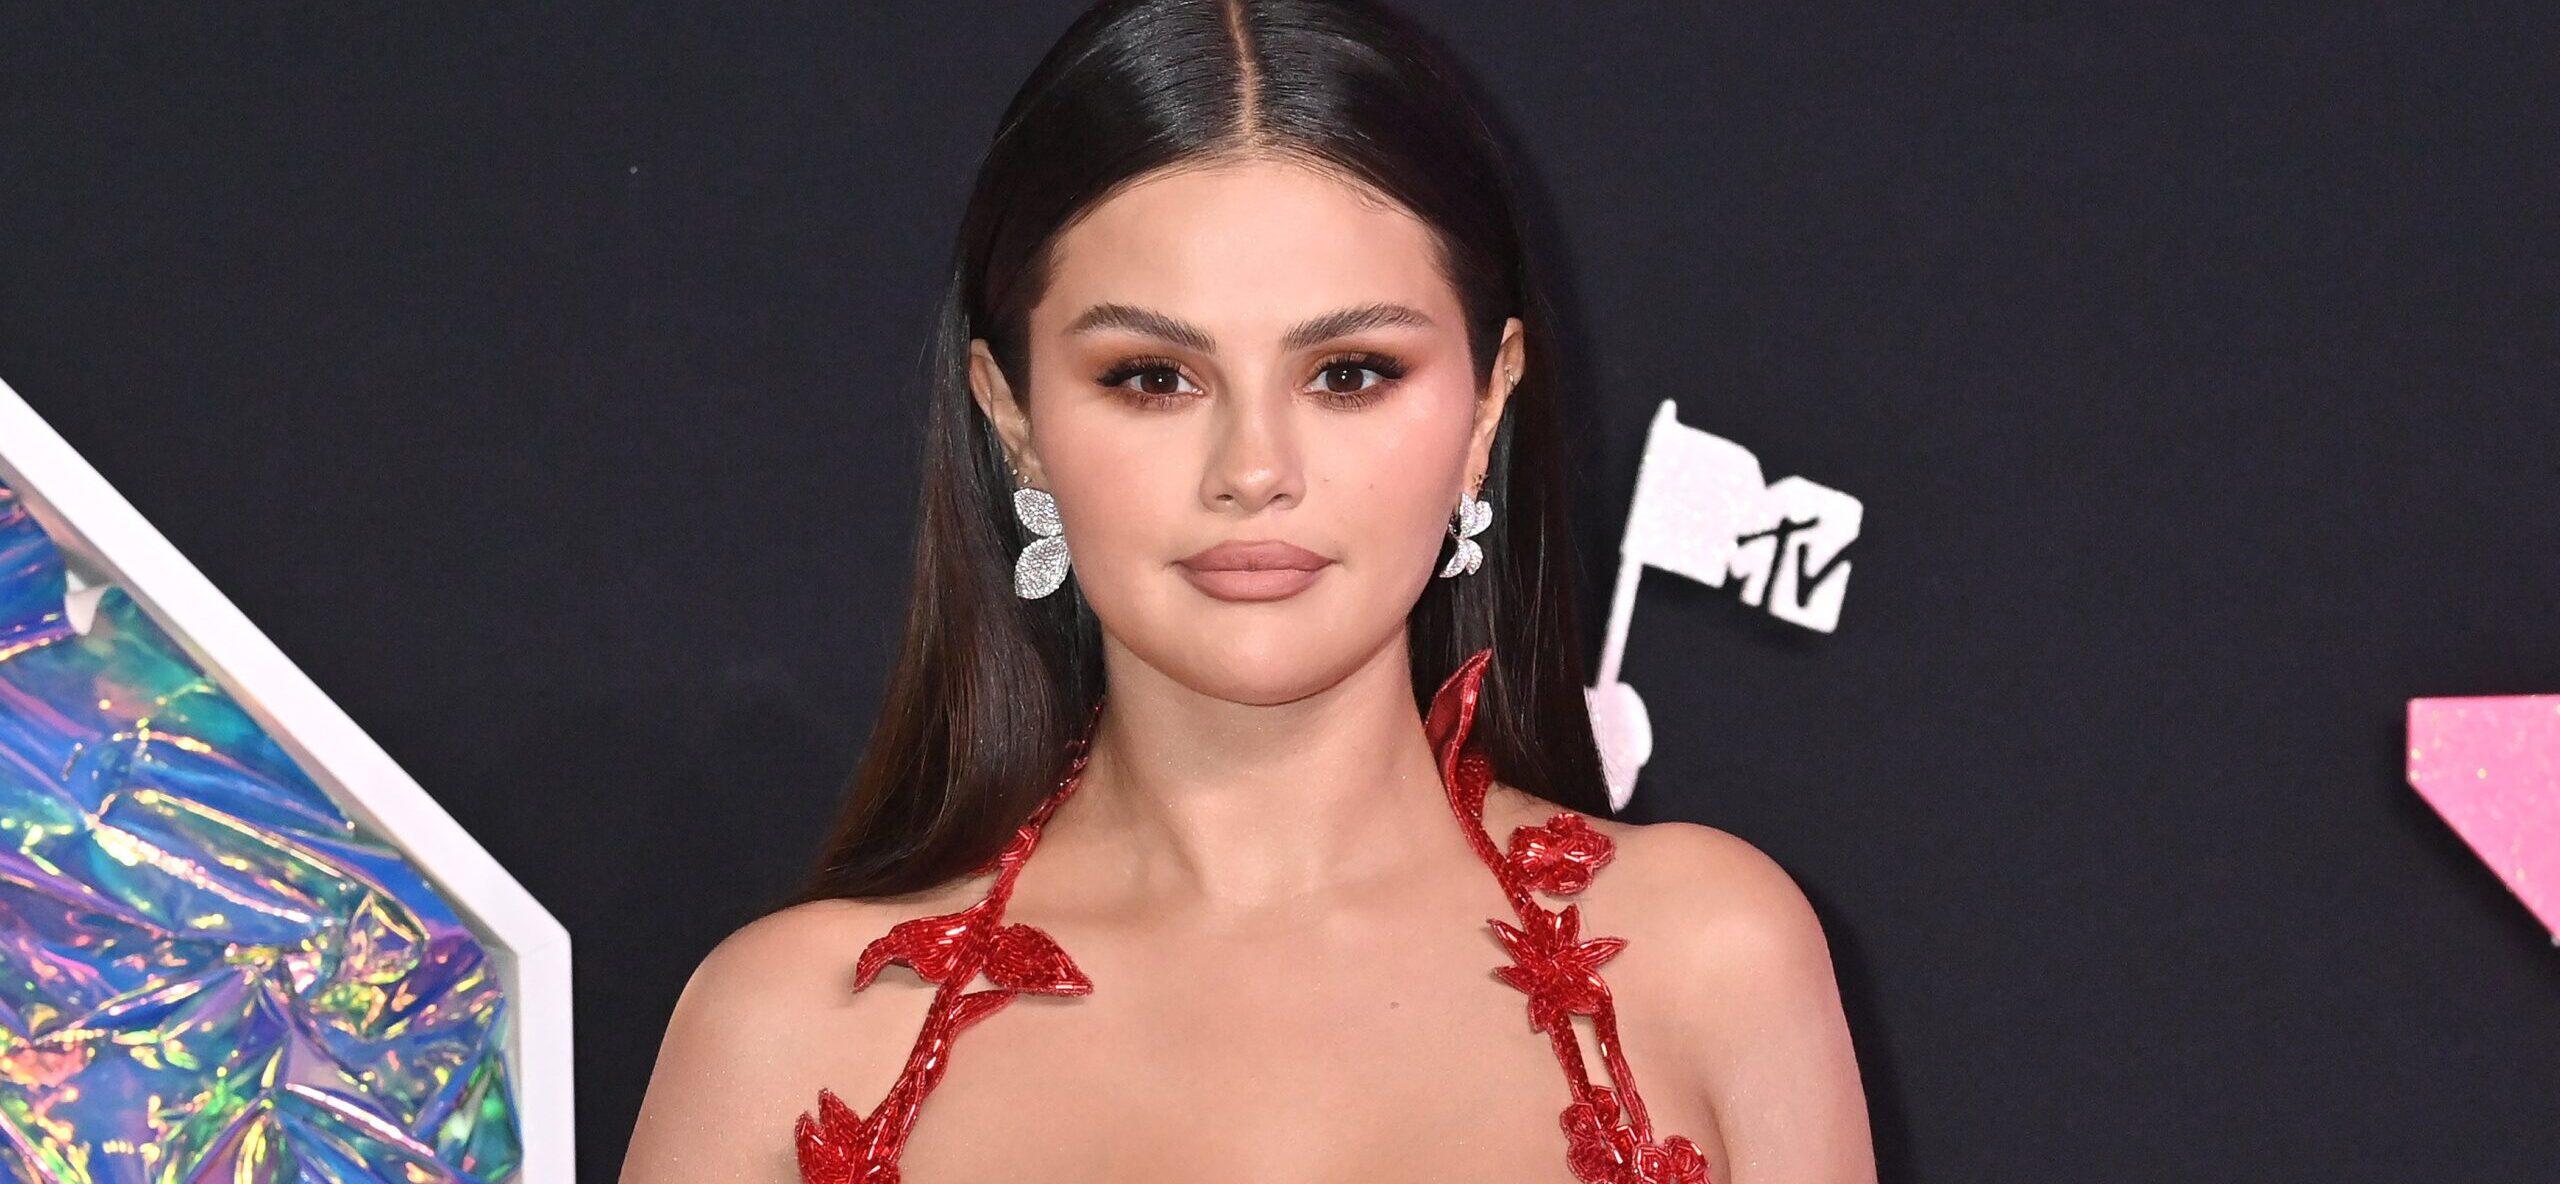 Selena Gomez stunned at the 2023 MTV VMAs in a red dress